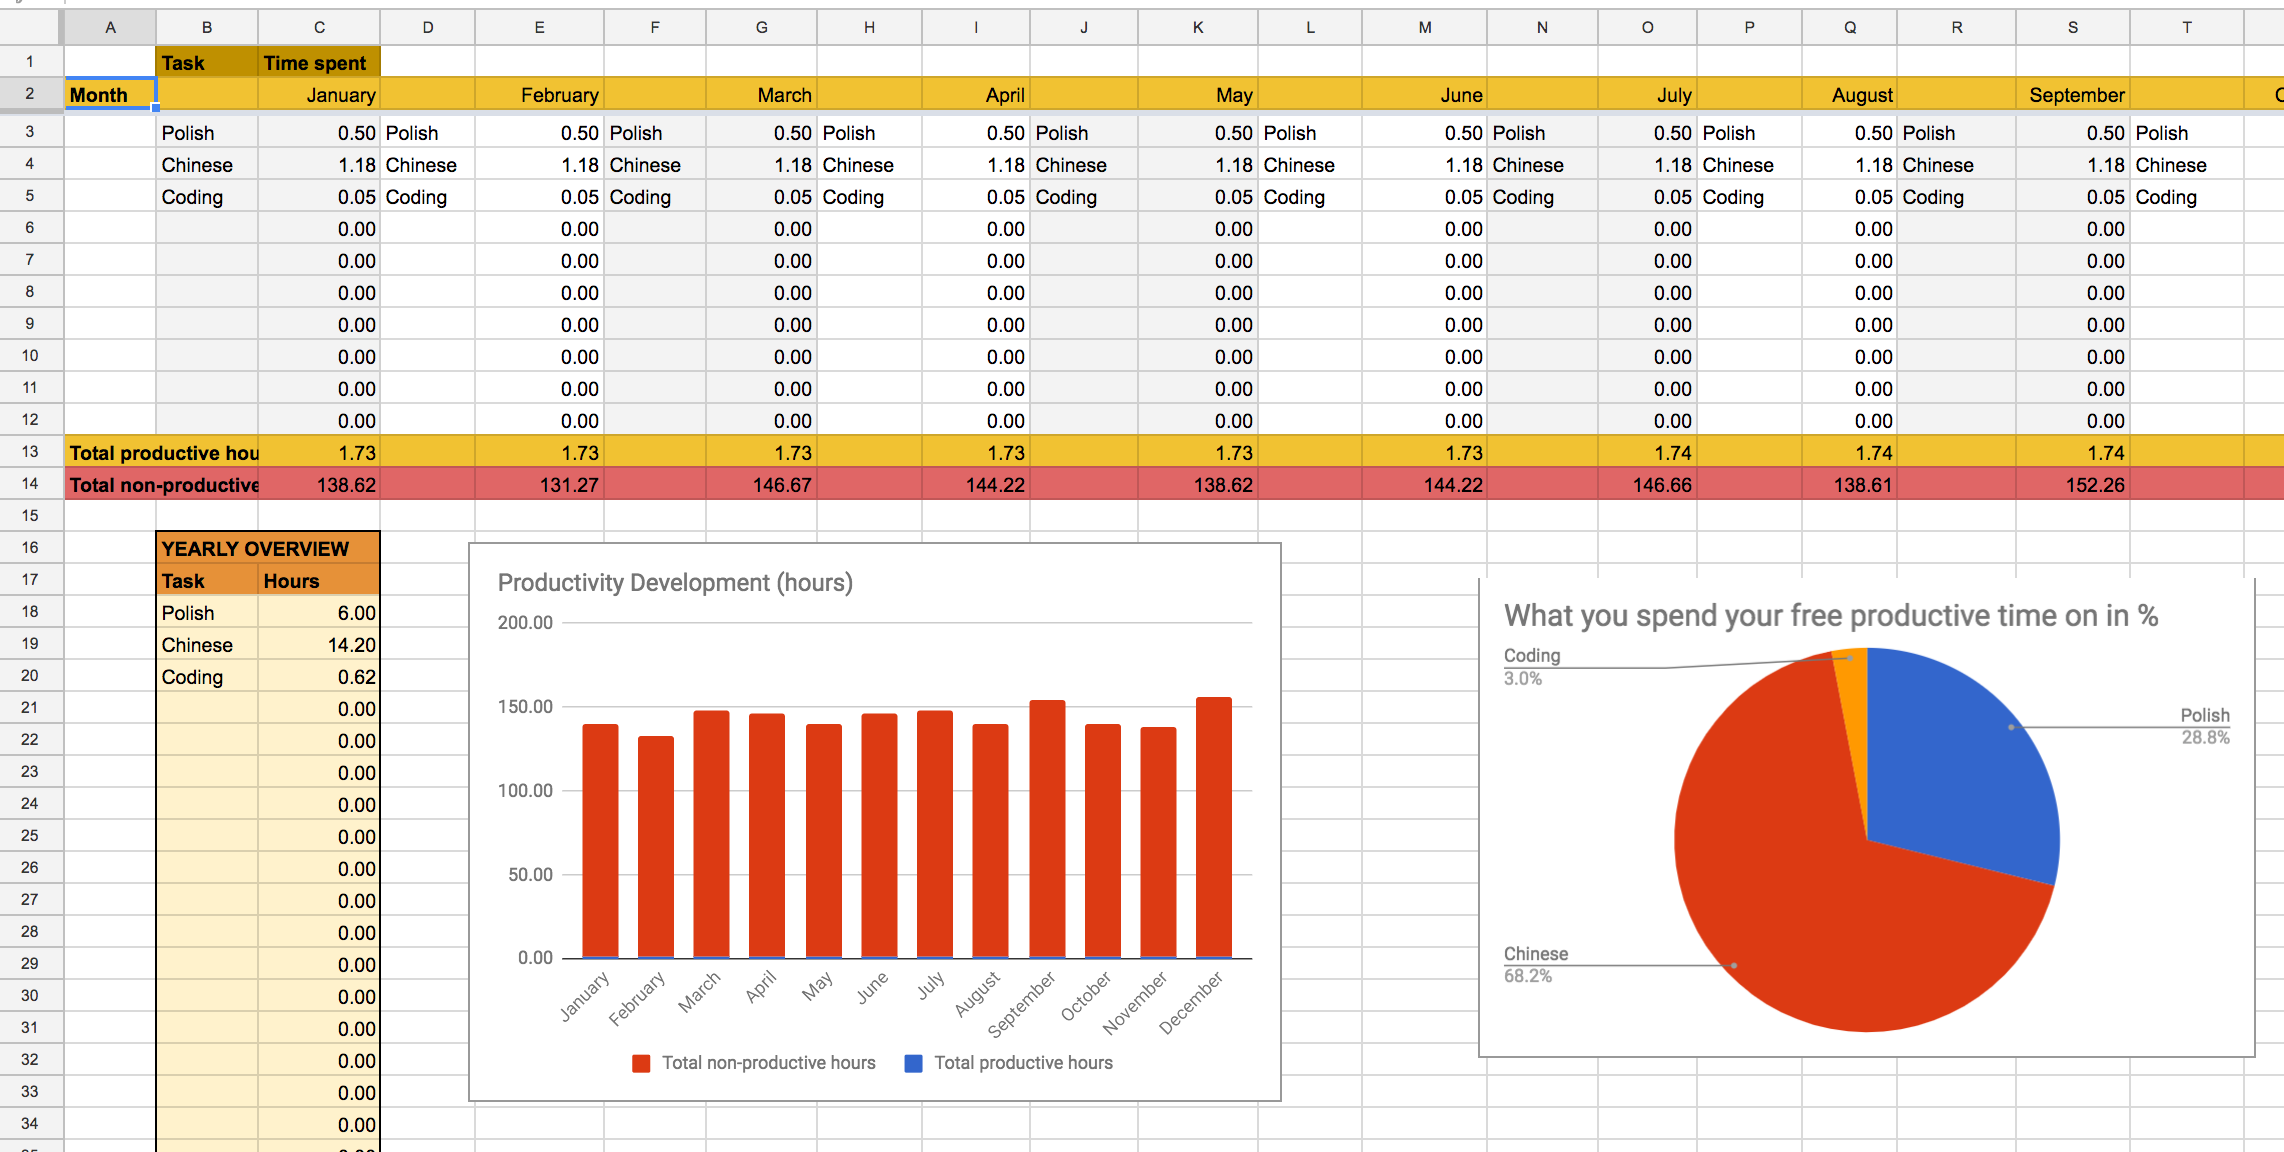 Work Allocation Sheets : Free Task Management Templates For Project Managers / Lot of companies ...